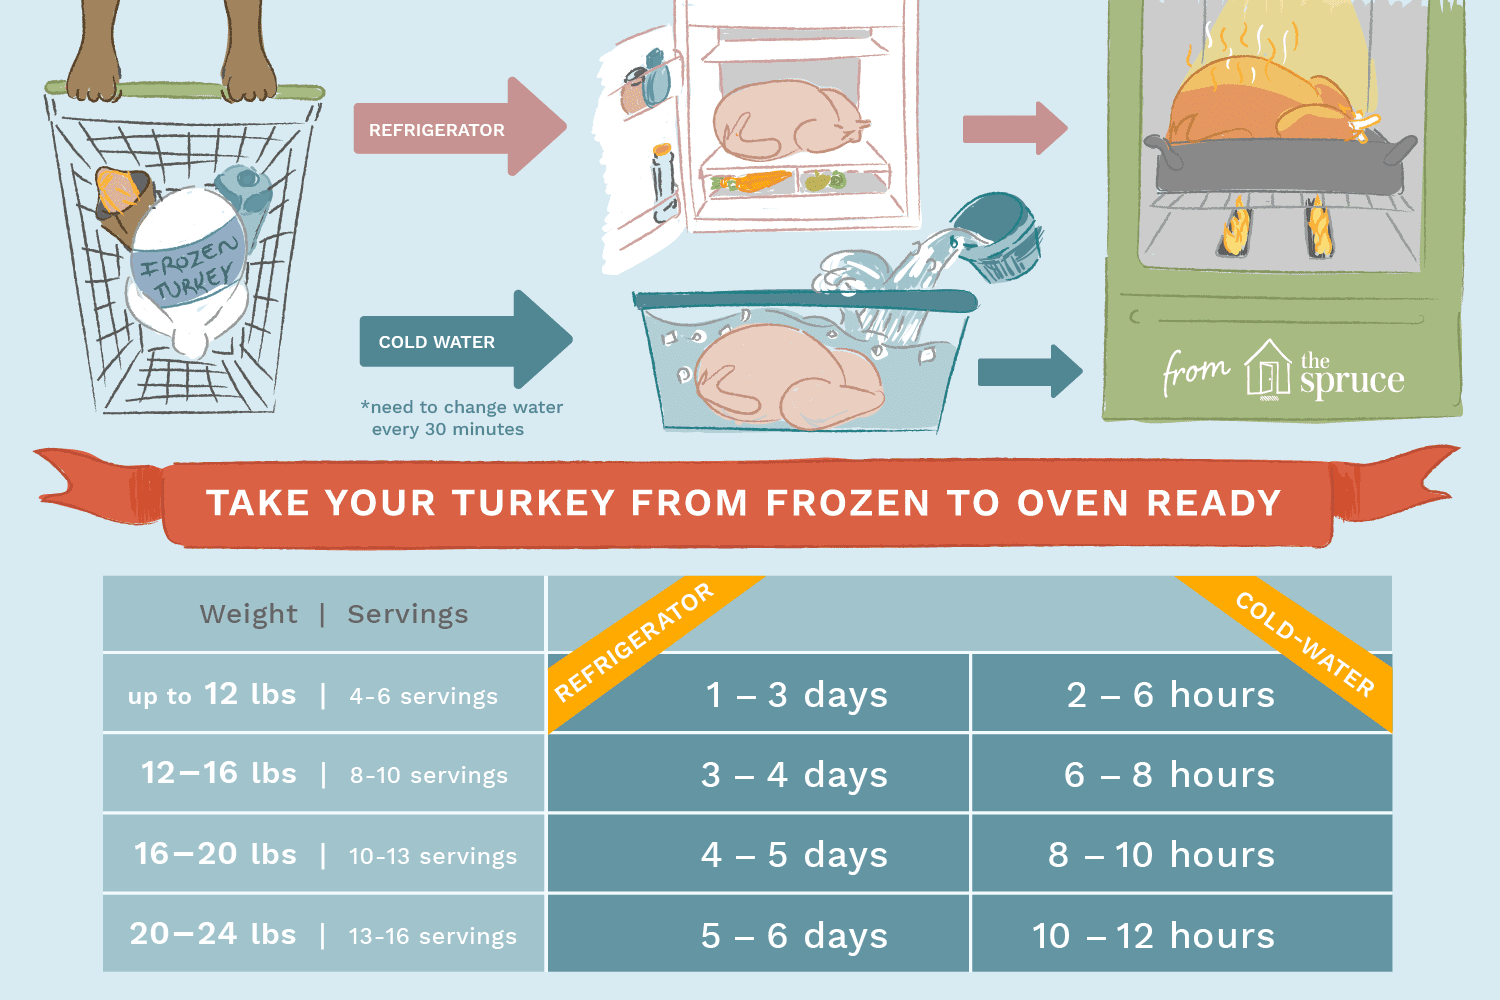 Turkey-Thawing-Times-The-Spruce-59f8d15e6f53ba00110ab058.png